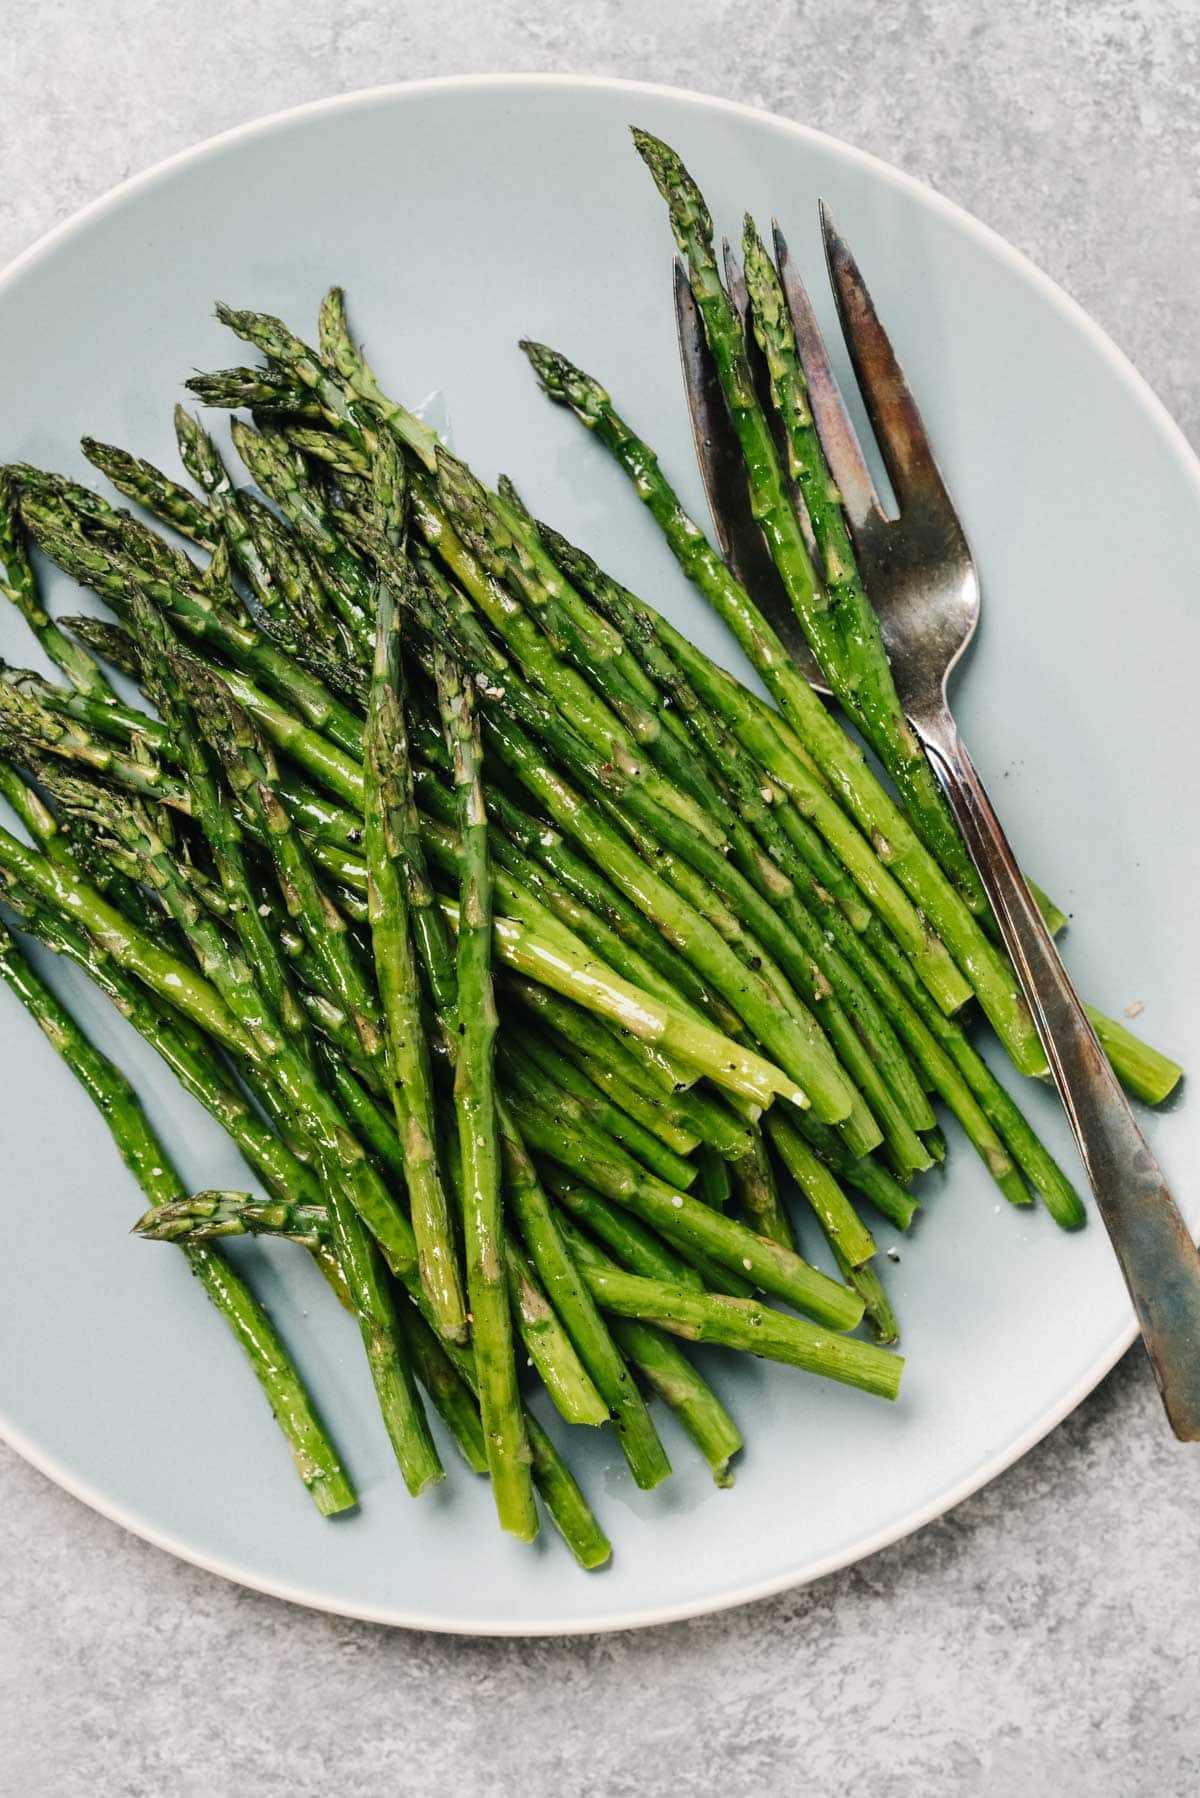 Roasted asparagus on a blue plate with a serving fork.